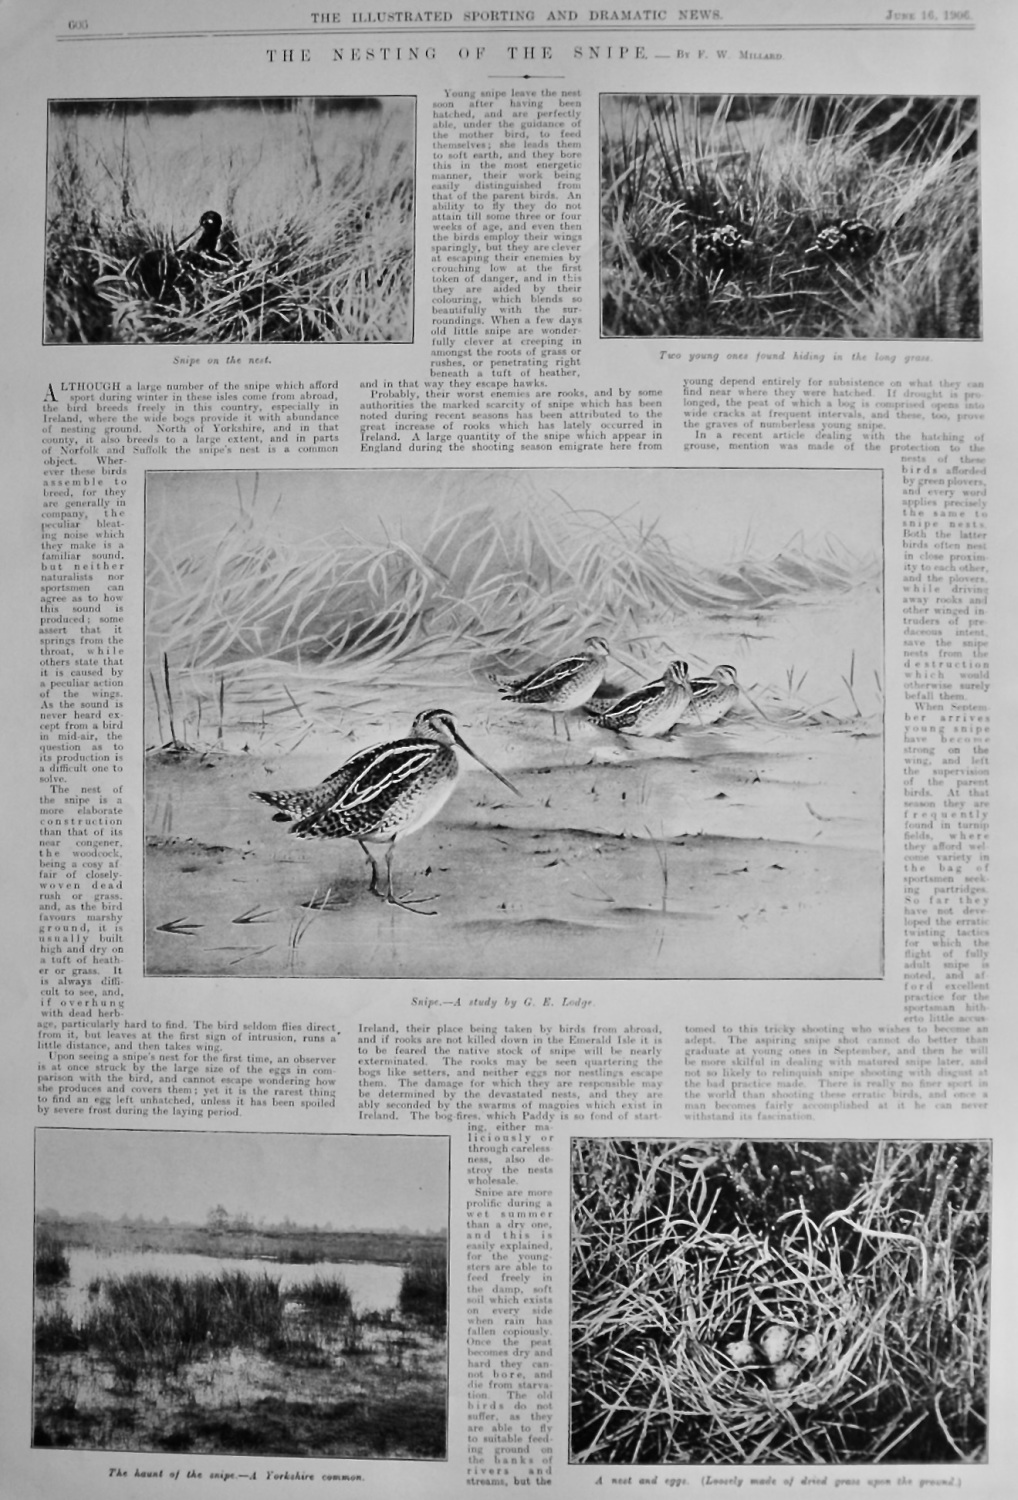 The Nesting of the Snipe.  1906.